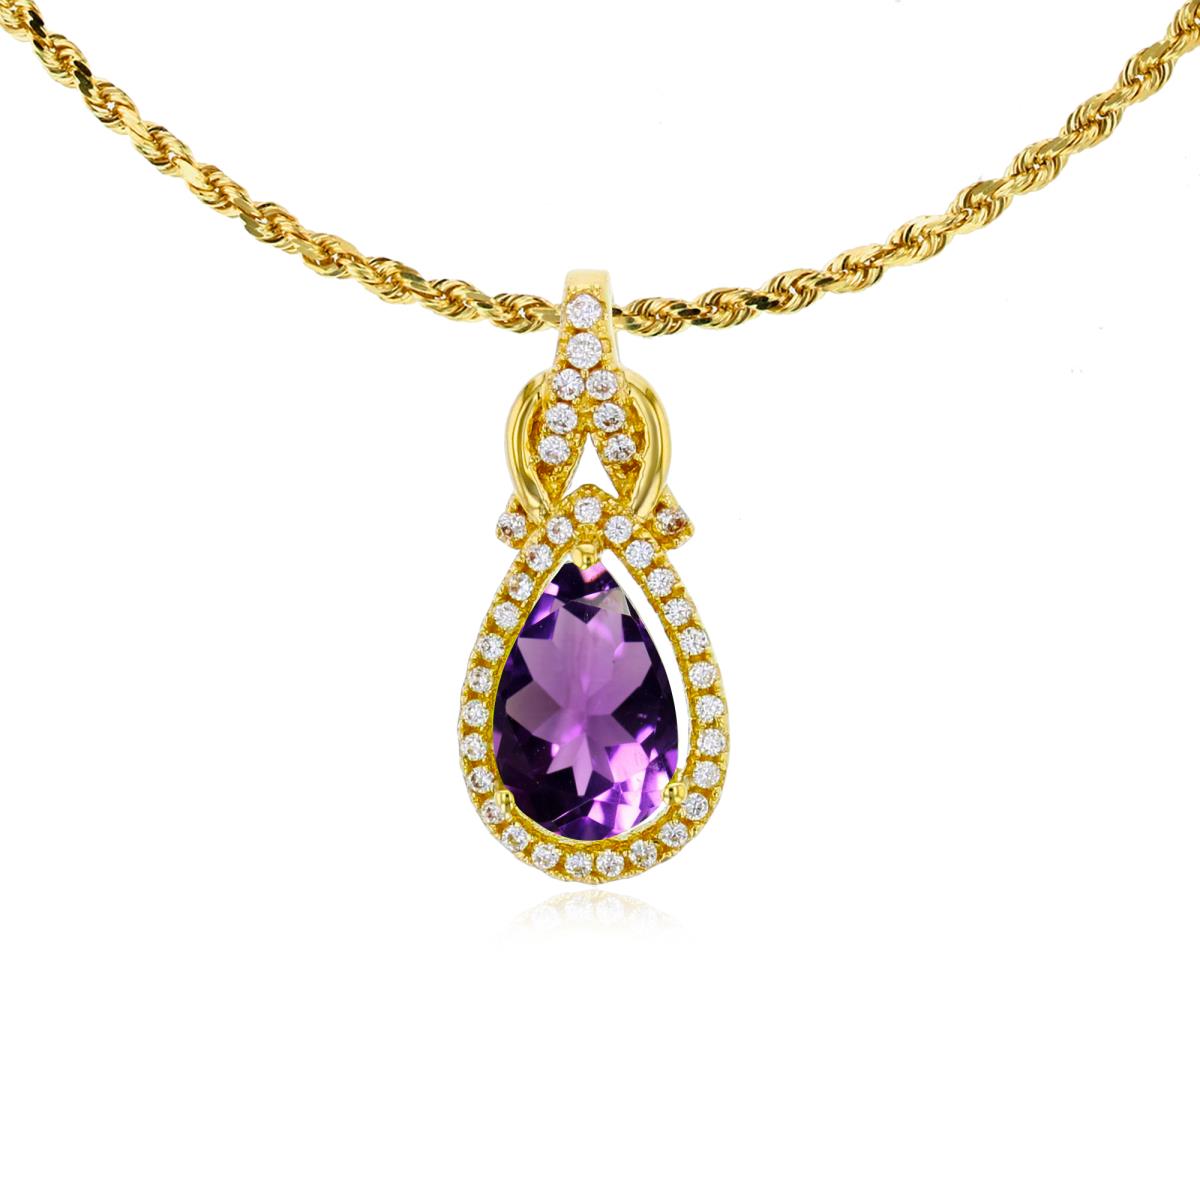 10K Yellow Gold 8x5mm Pear Cut Amethyst & 0.11 CTTW Rnd Diamond Knot 18" Rope Chain Necklace